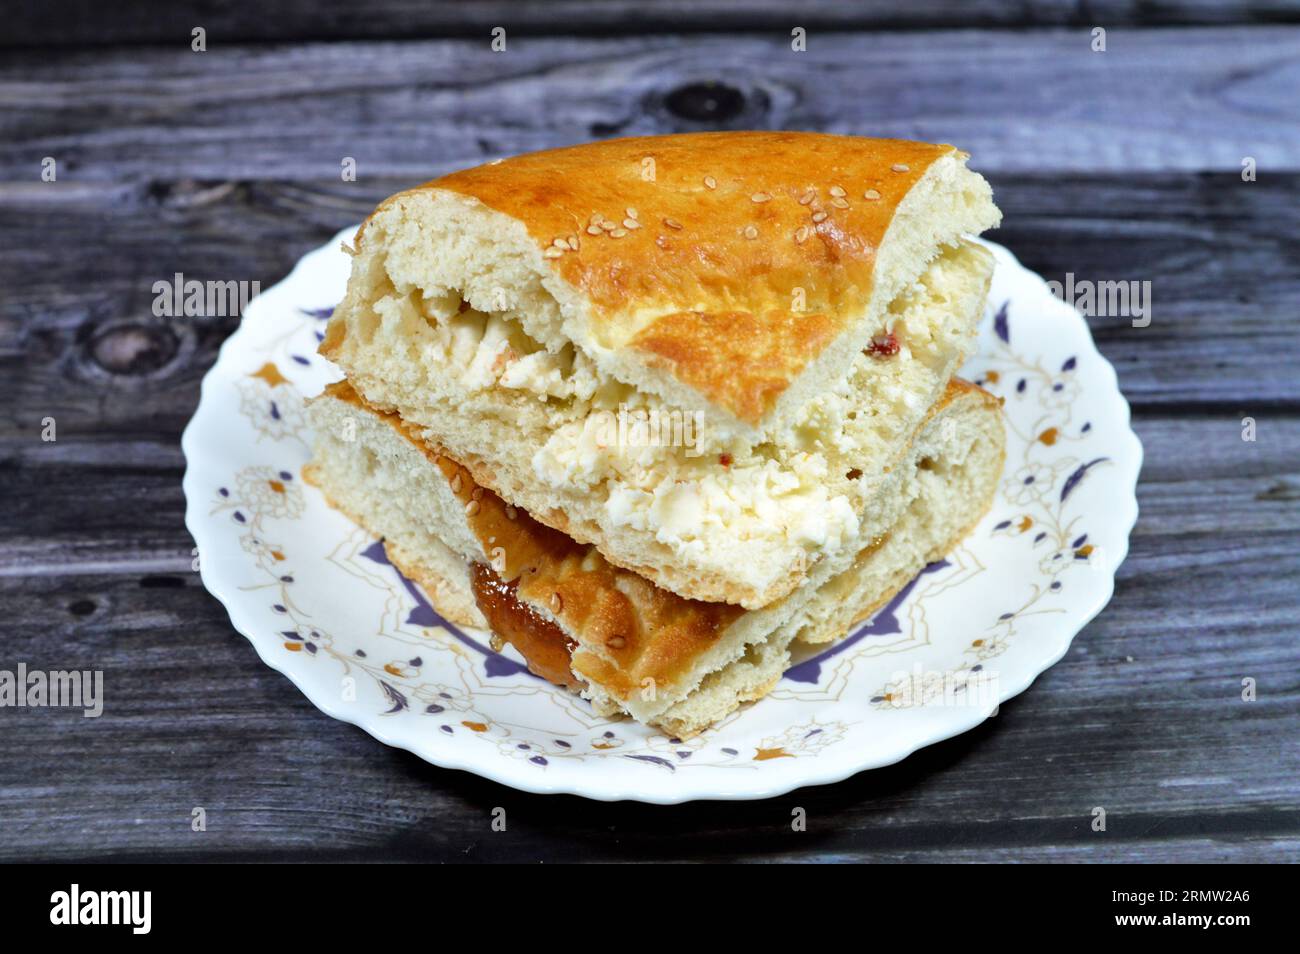 White cheese and fig jam inside a tandyr nan Uzbek bread, a type of Central Asian bread, often decorated by stamping patterns on the dough by using a Stock Photo